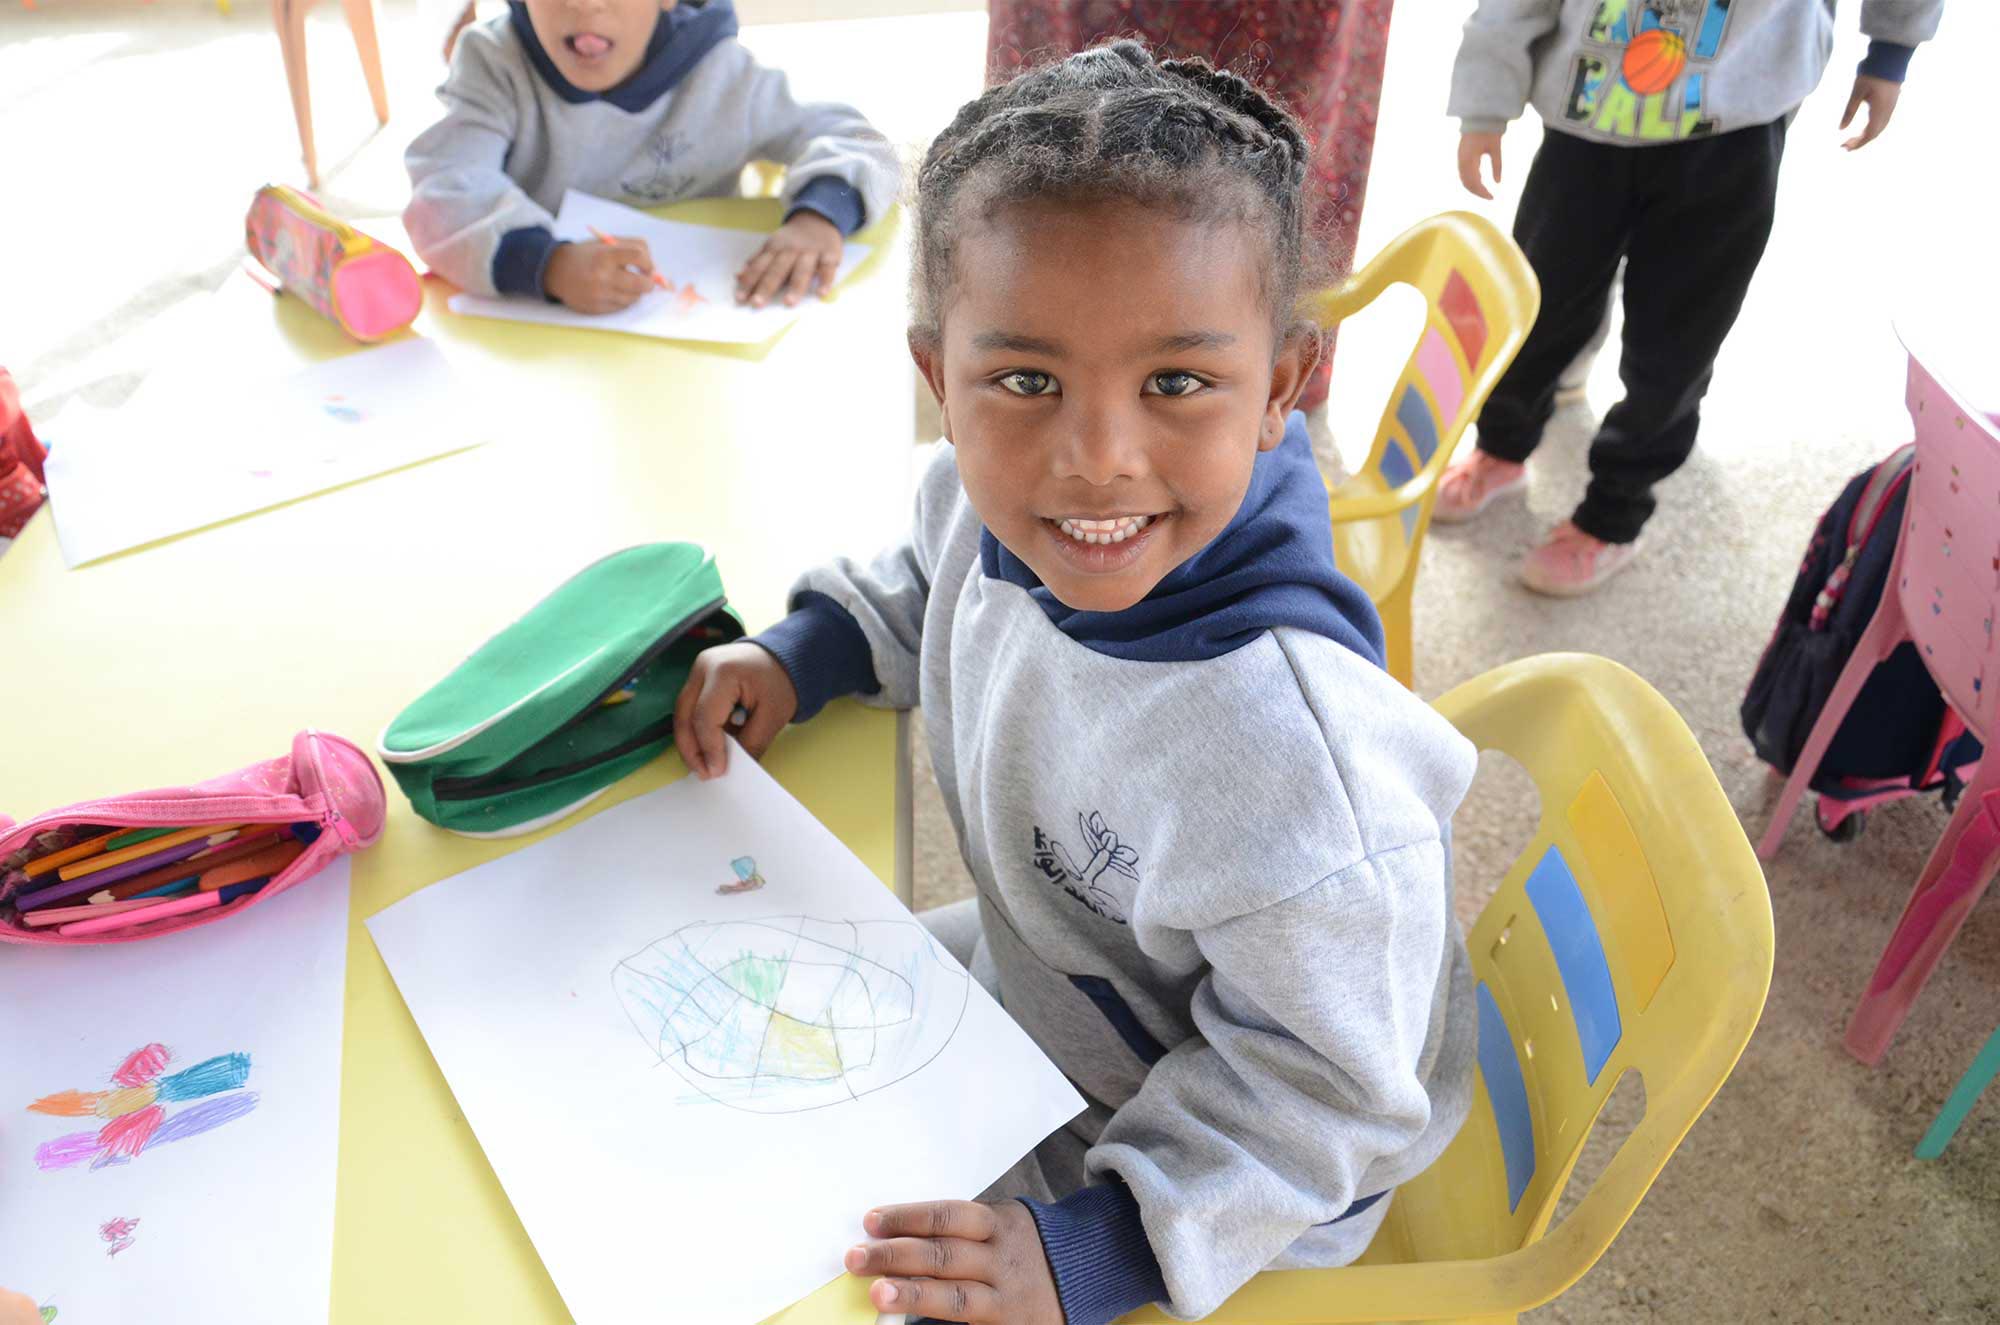 Drawing is a part of early childhood development in Palestine preschools.